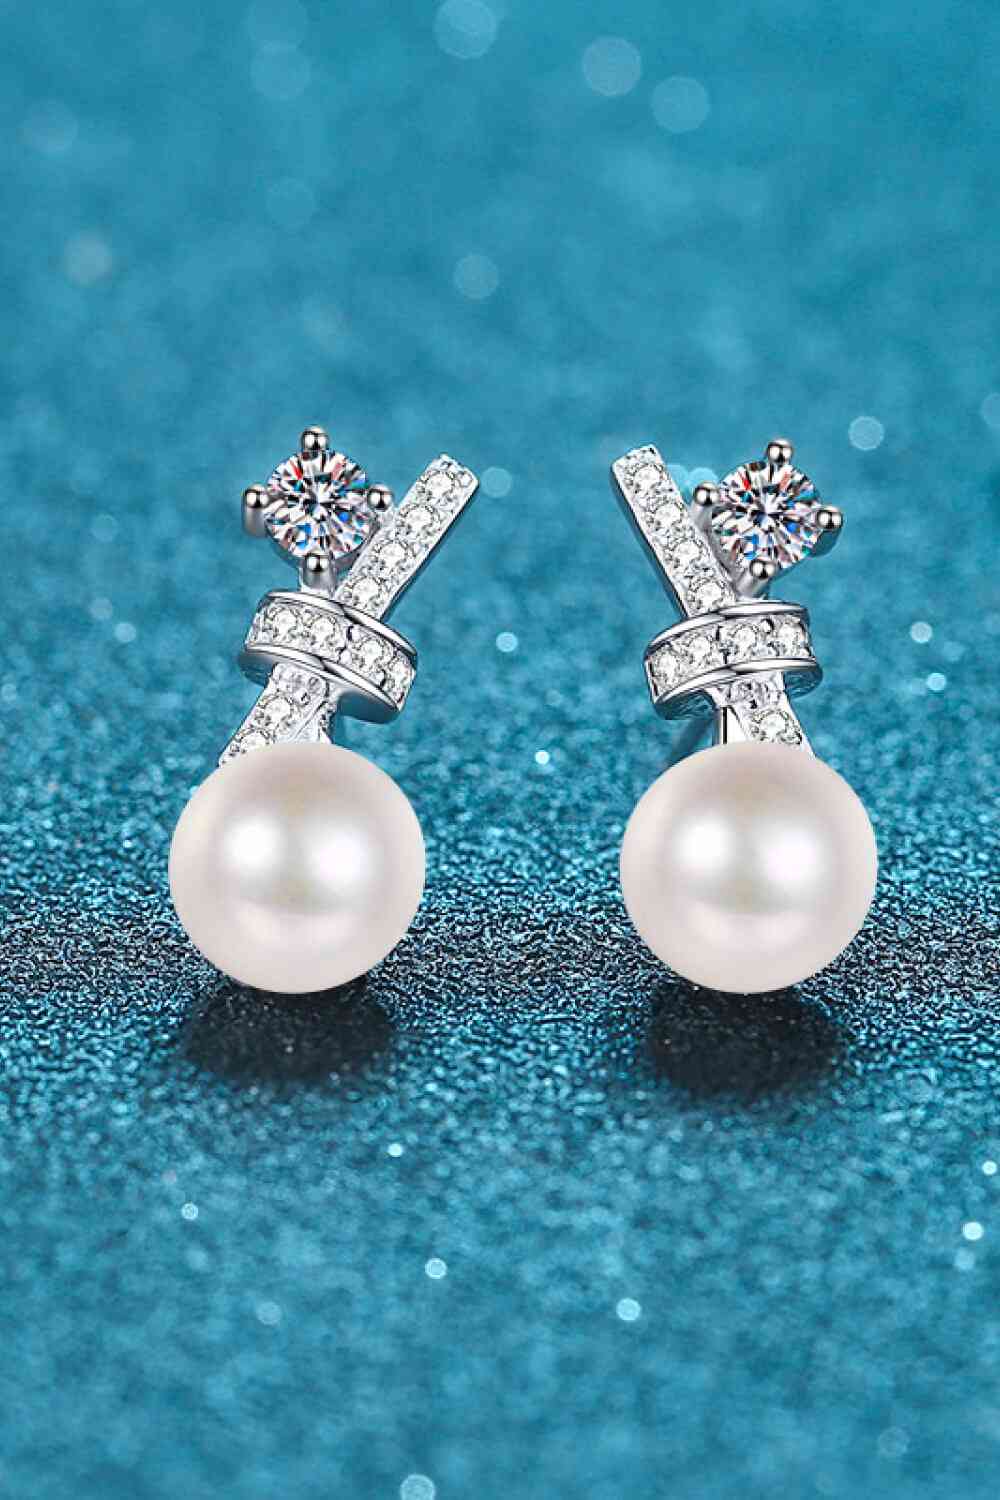 Pearl Moissanite Stud Earrings - Kawaii Stop - 925 Sterling Silver, Classic Design, DY-N, Elegance, Exquisite Craftsmanship, Fashion Jewelry, Gift Idea, Imported, Luster, Luxury, Matching Box, Moissanite, Pearl, Rhodium-Plated, Ship From Overseas, Stud Earrings, Timeless Beauty, Zircon Accents